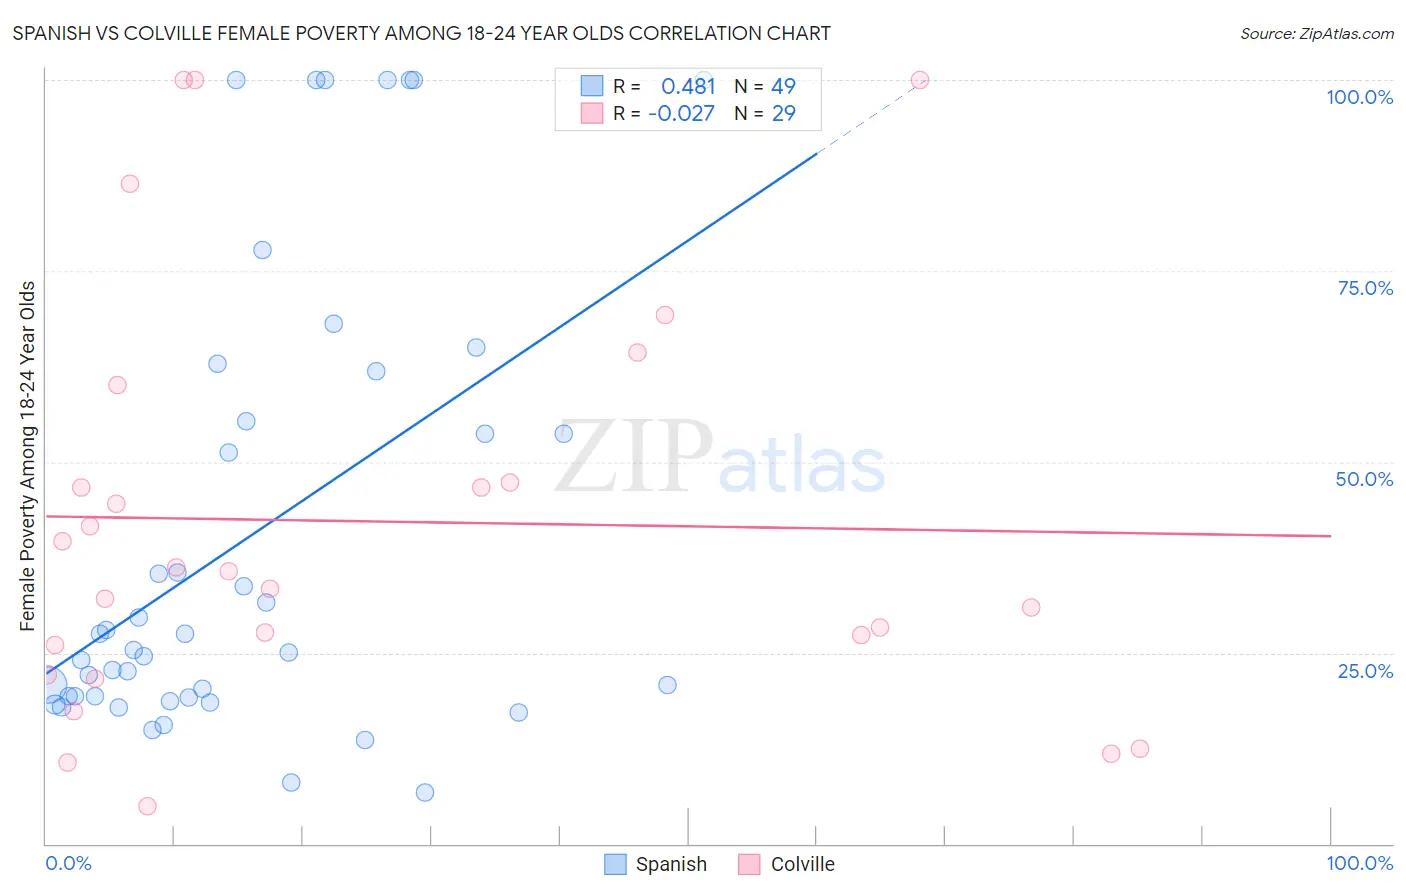 Spanish vs Colville Female Poverty Among 18-24 Year Olds